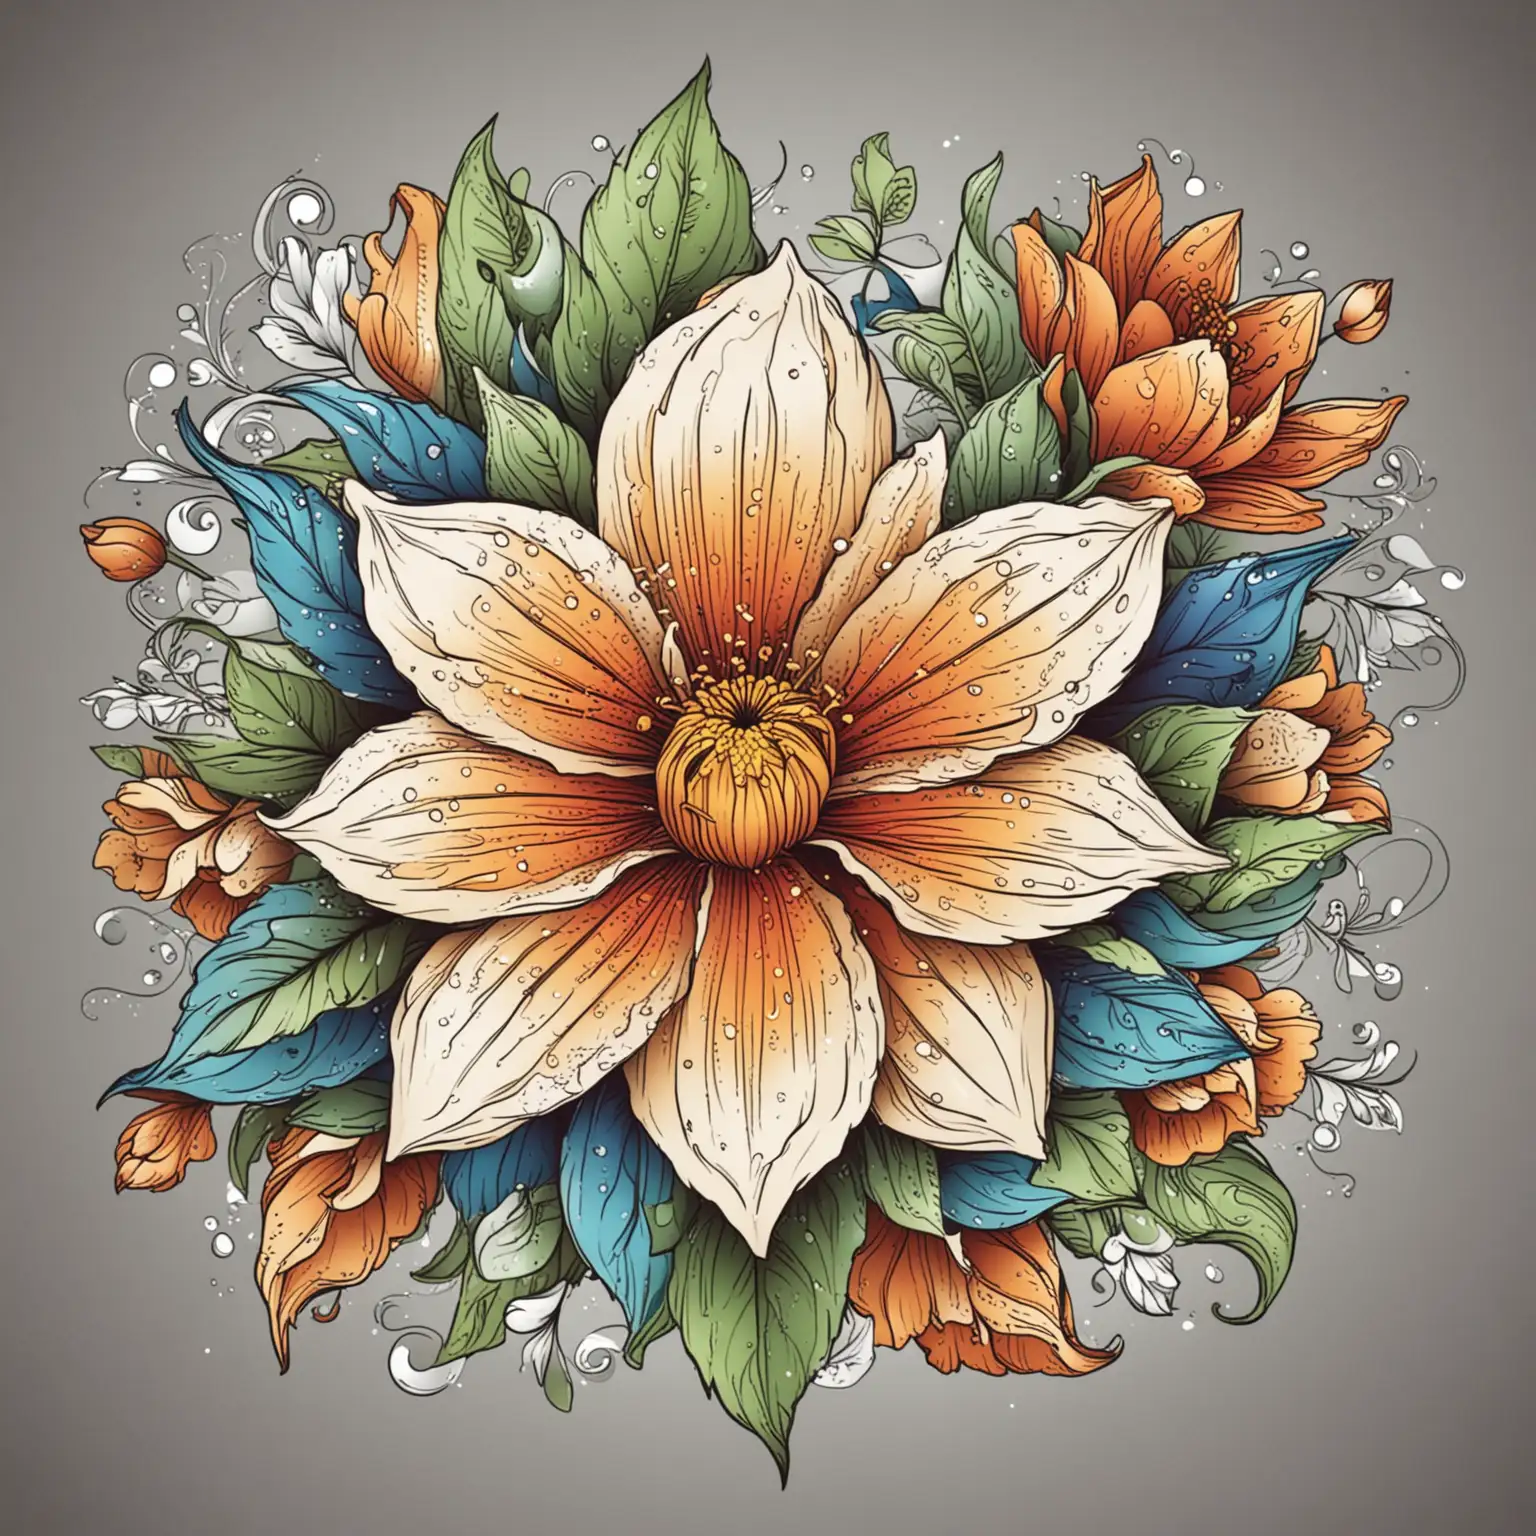 Coloring Book Cover Featuring a Stunning Flower Illustration